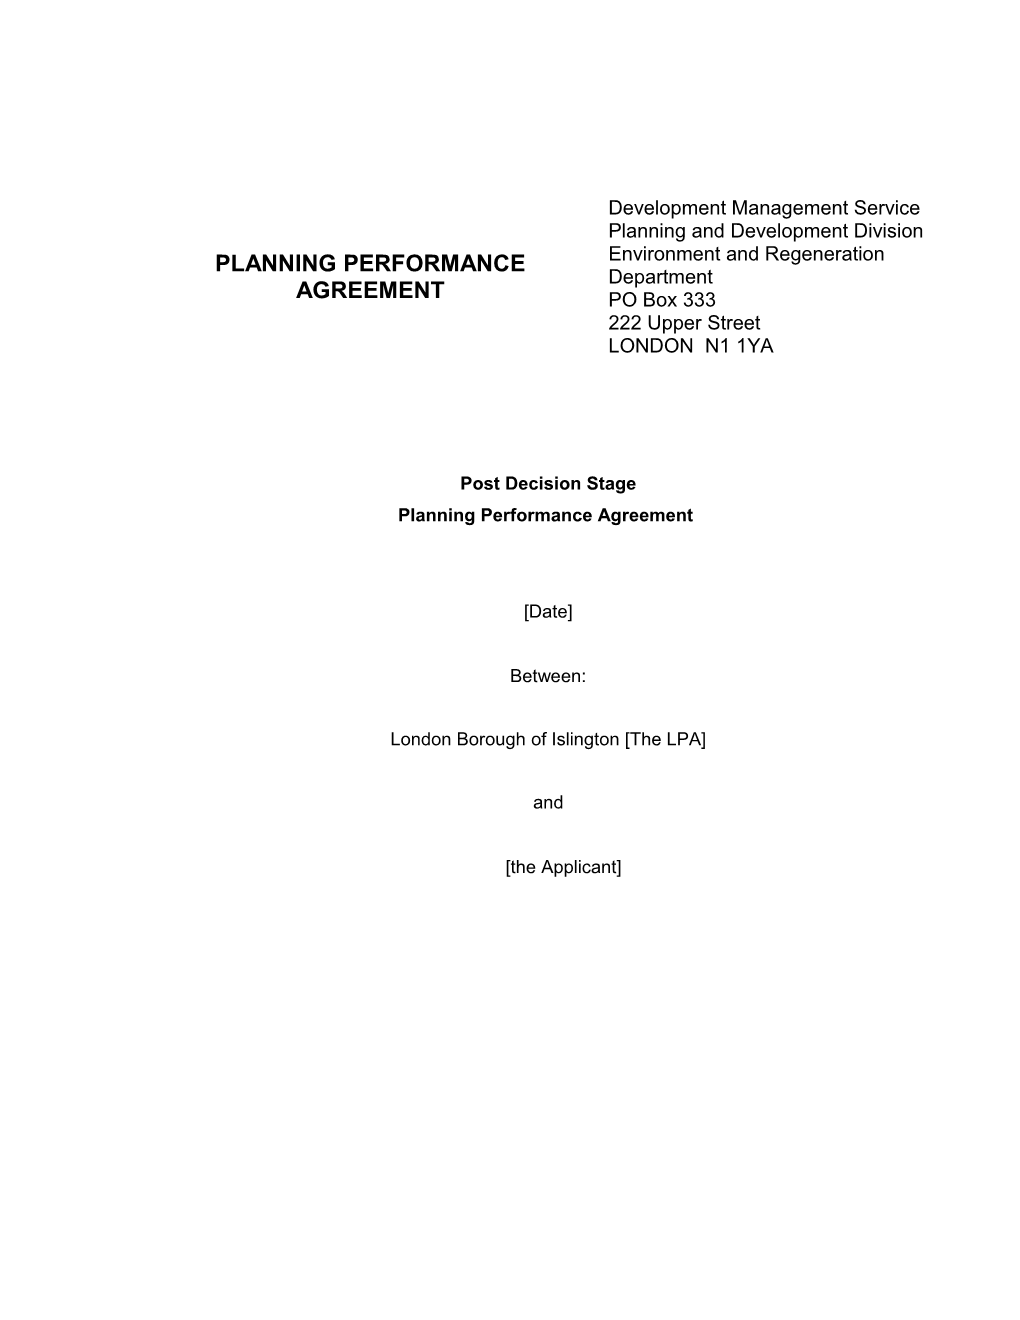 Template Post Decision Stage Planning Performance Agreement (April 2016)